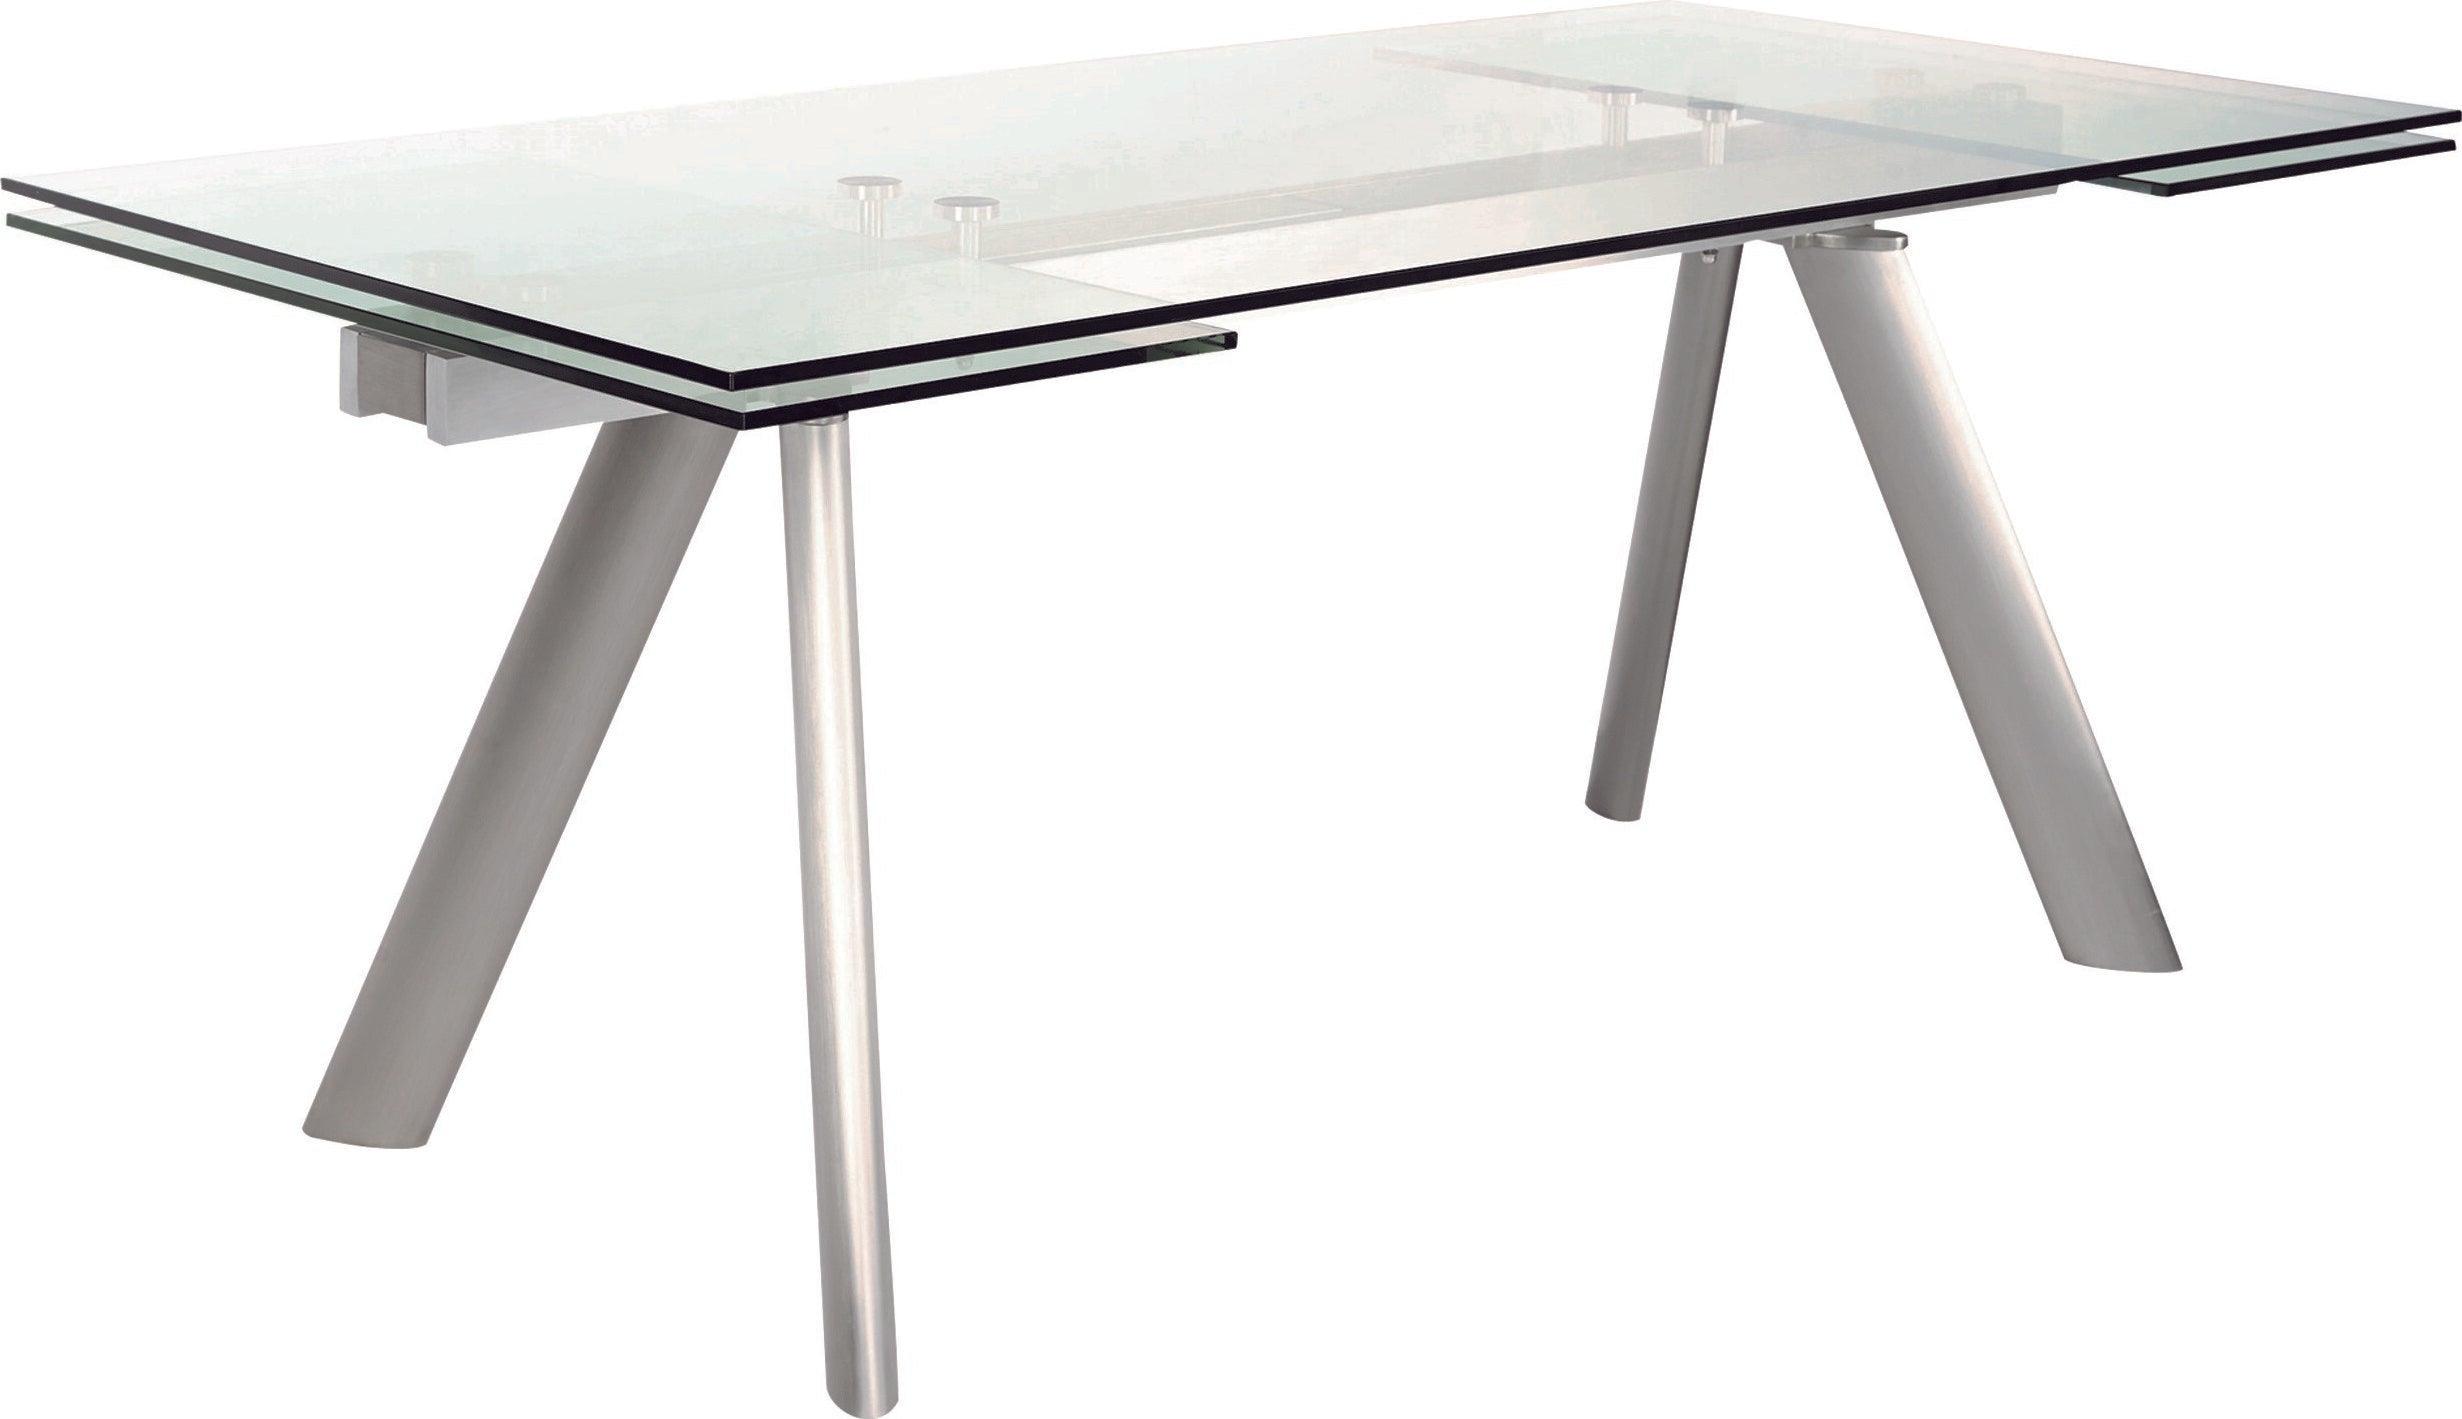 Euro Style Dining Tables - Delano 102" Rectangle Extension Dining Table Clear